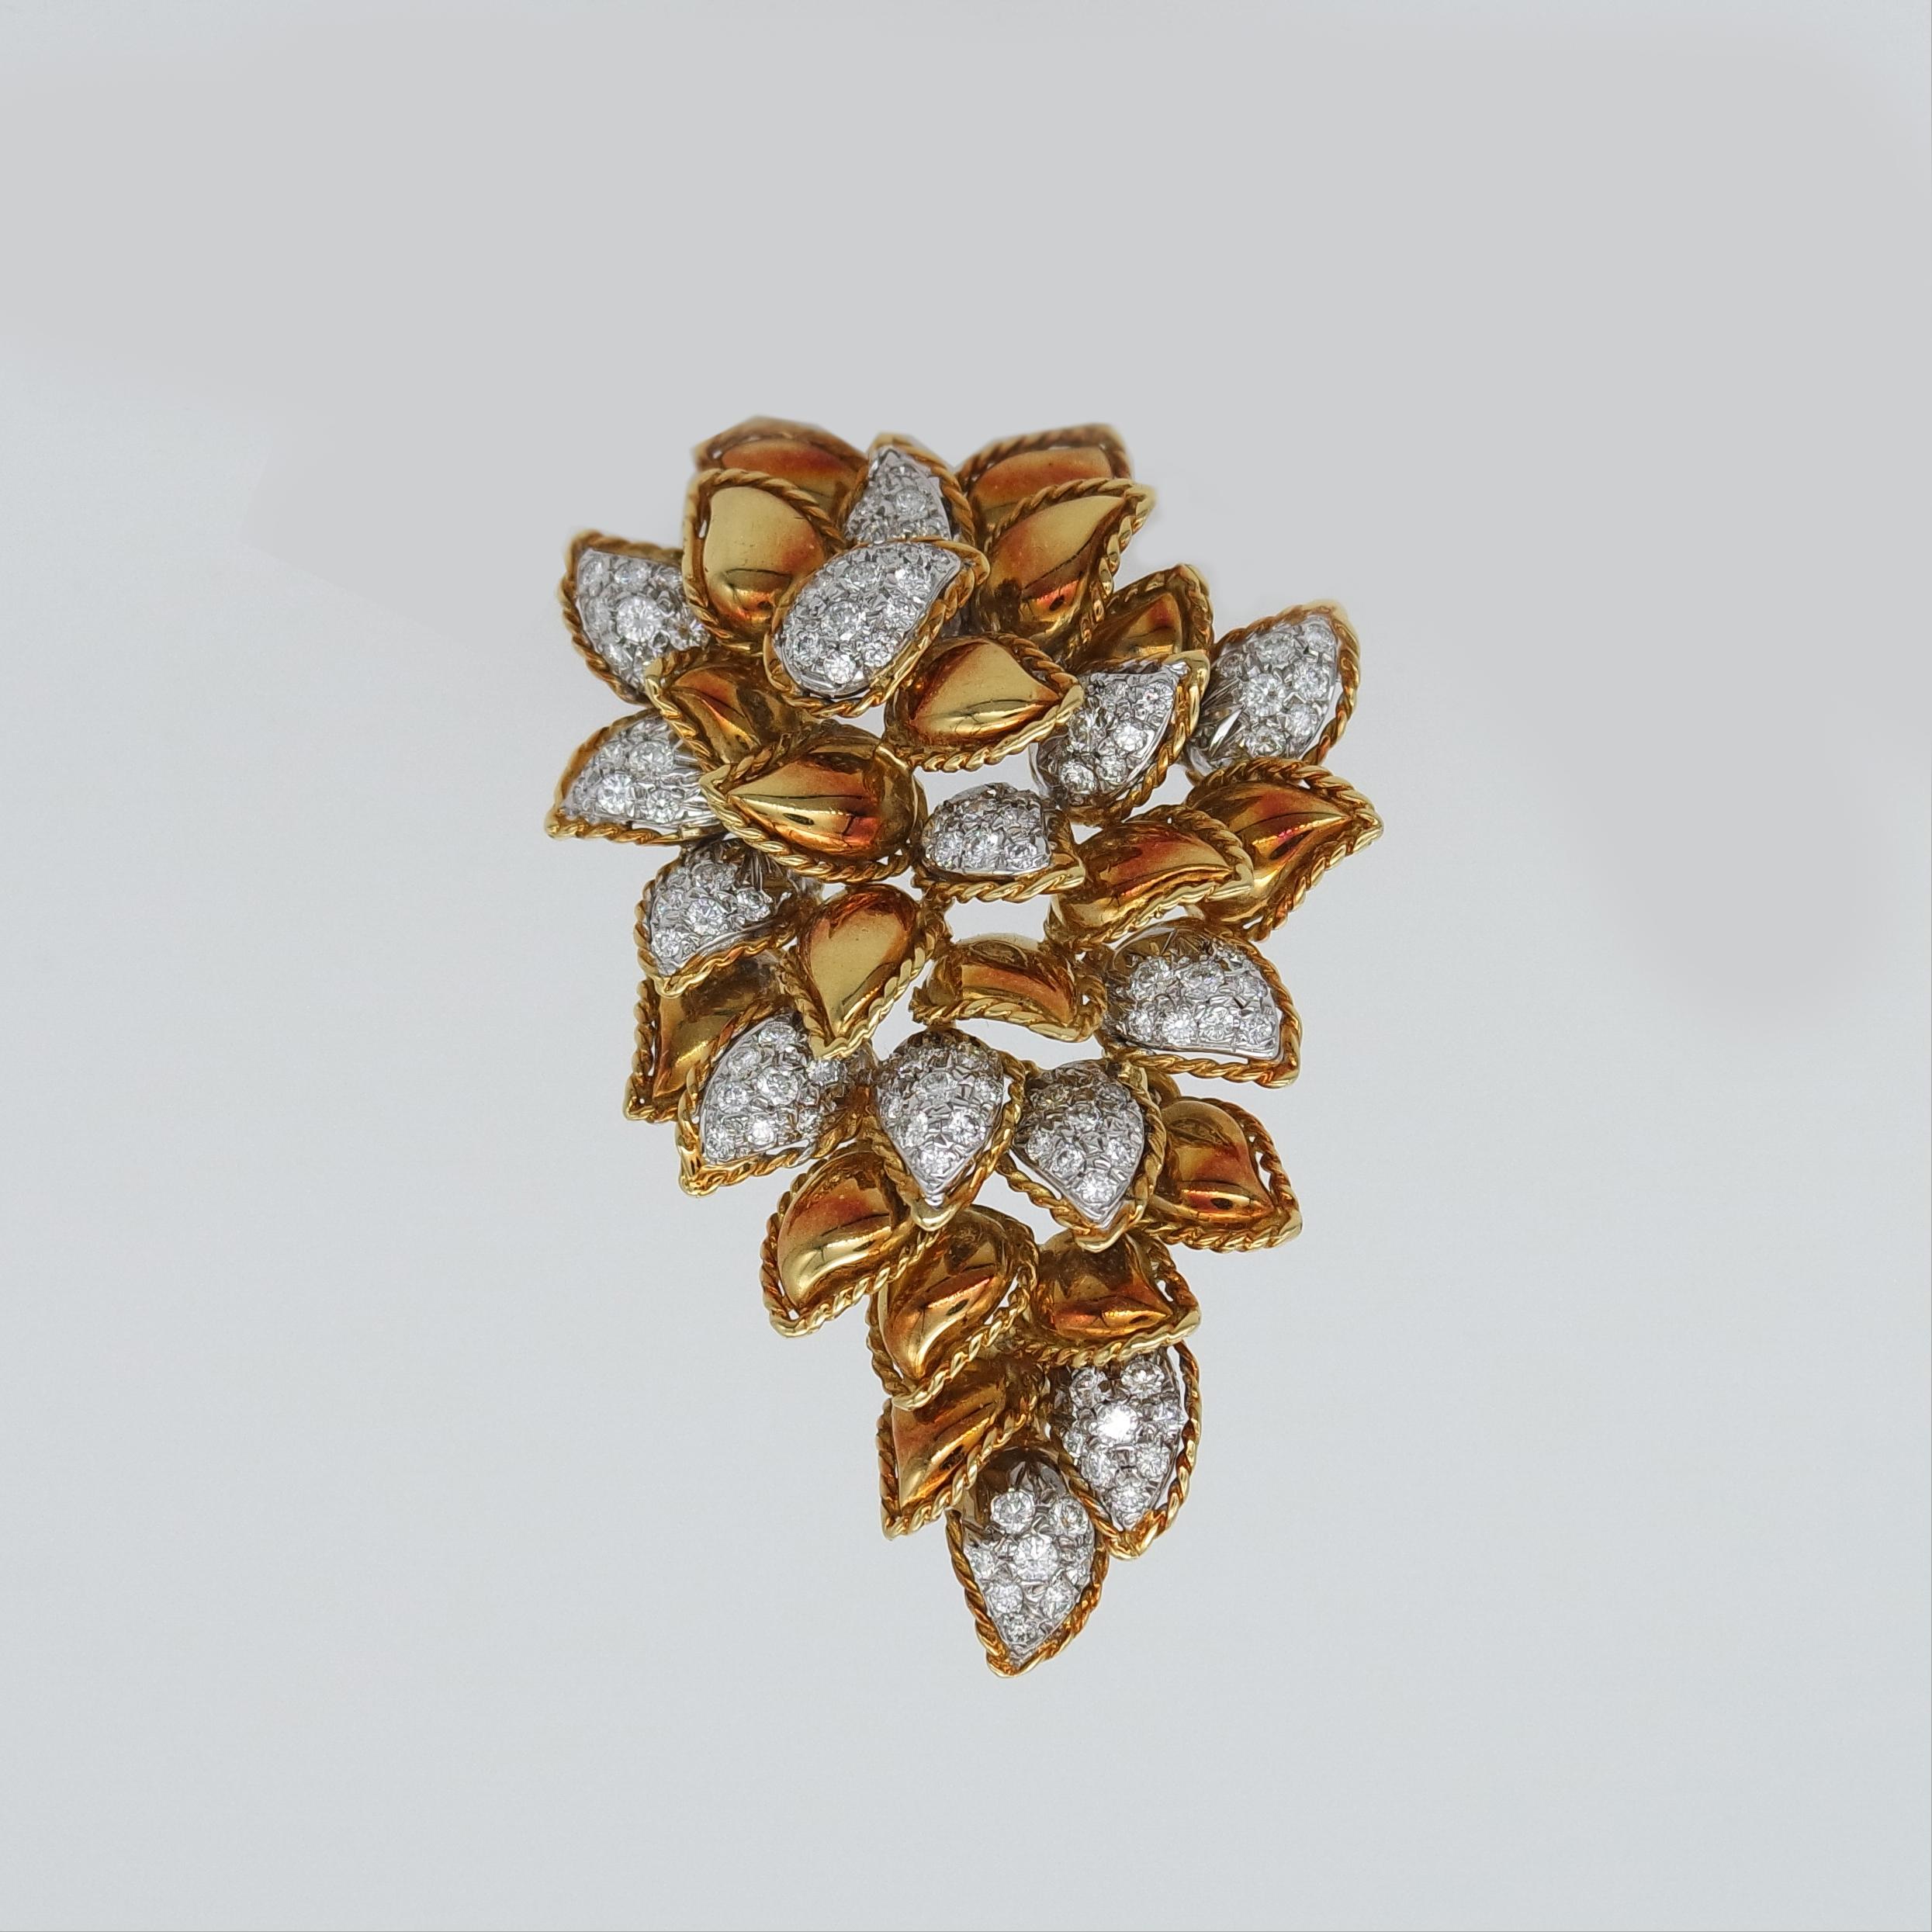 This vintage brooch in 18 karat yellow gold with round brilliant diamonds exudes Milanese elegance from re-known Via Montenapoleone jeweler Sabbadini. 
It is constructed with 31 small gold leaves of which some with diamonds, assembled on